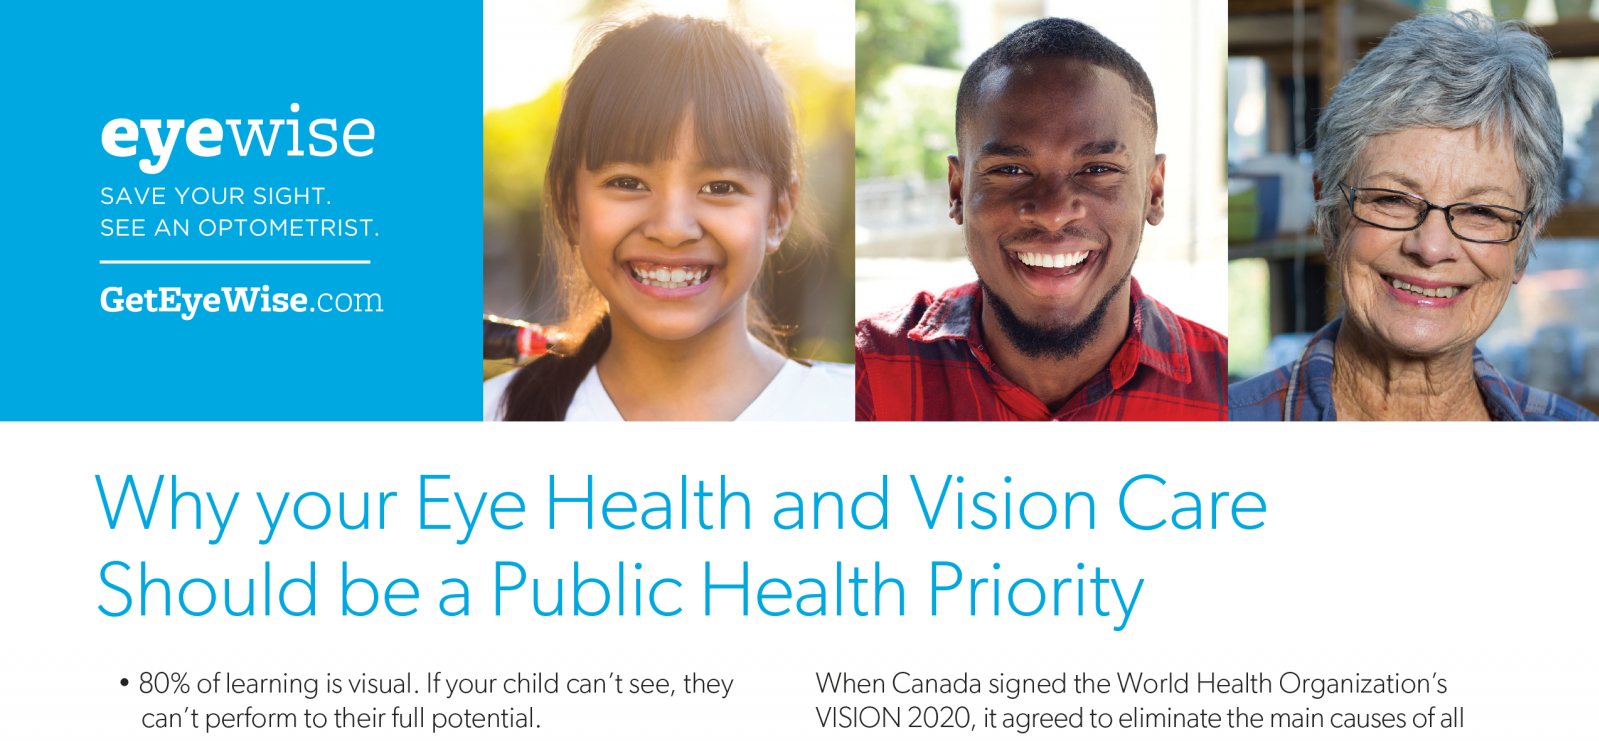 Why your Eye Health and Vision Care Should be a Public Health Priority